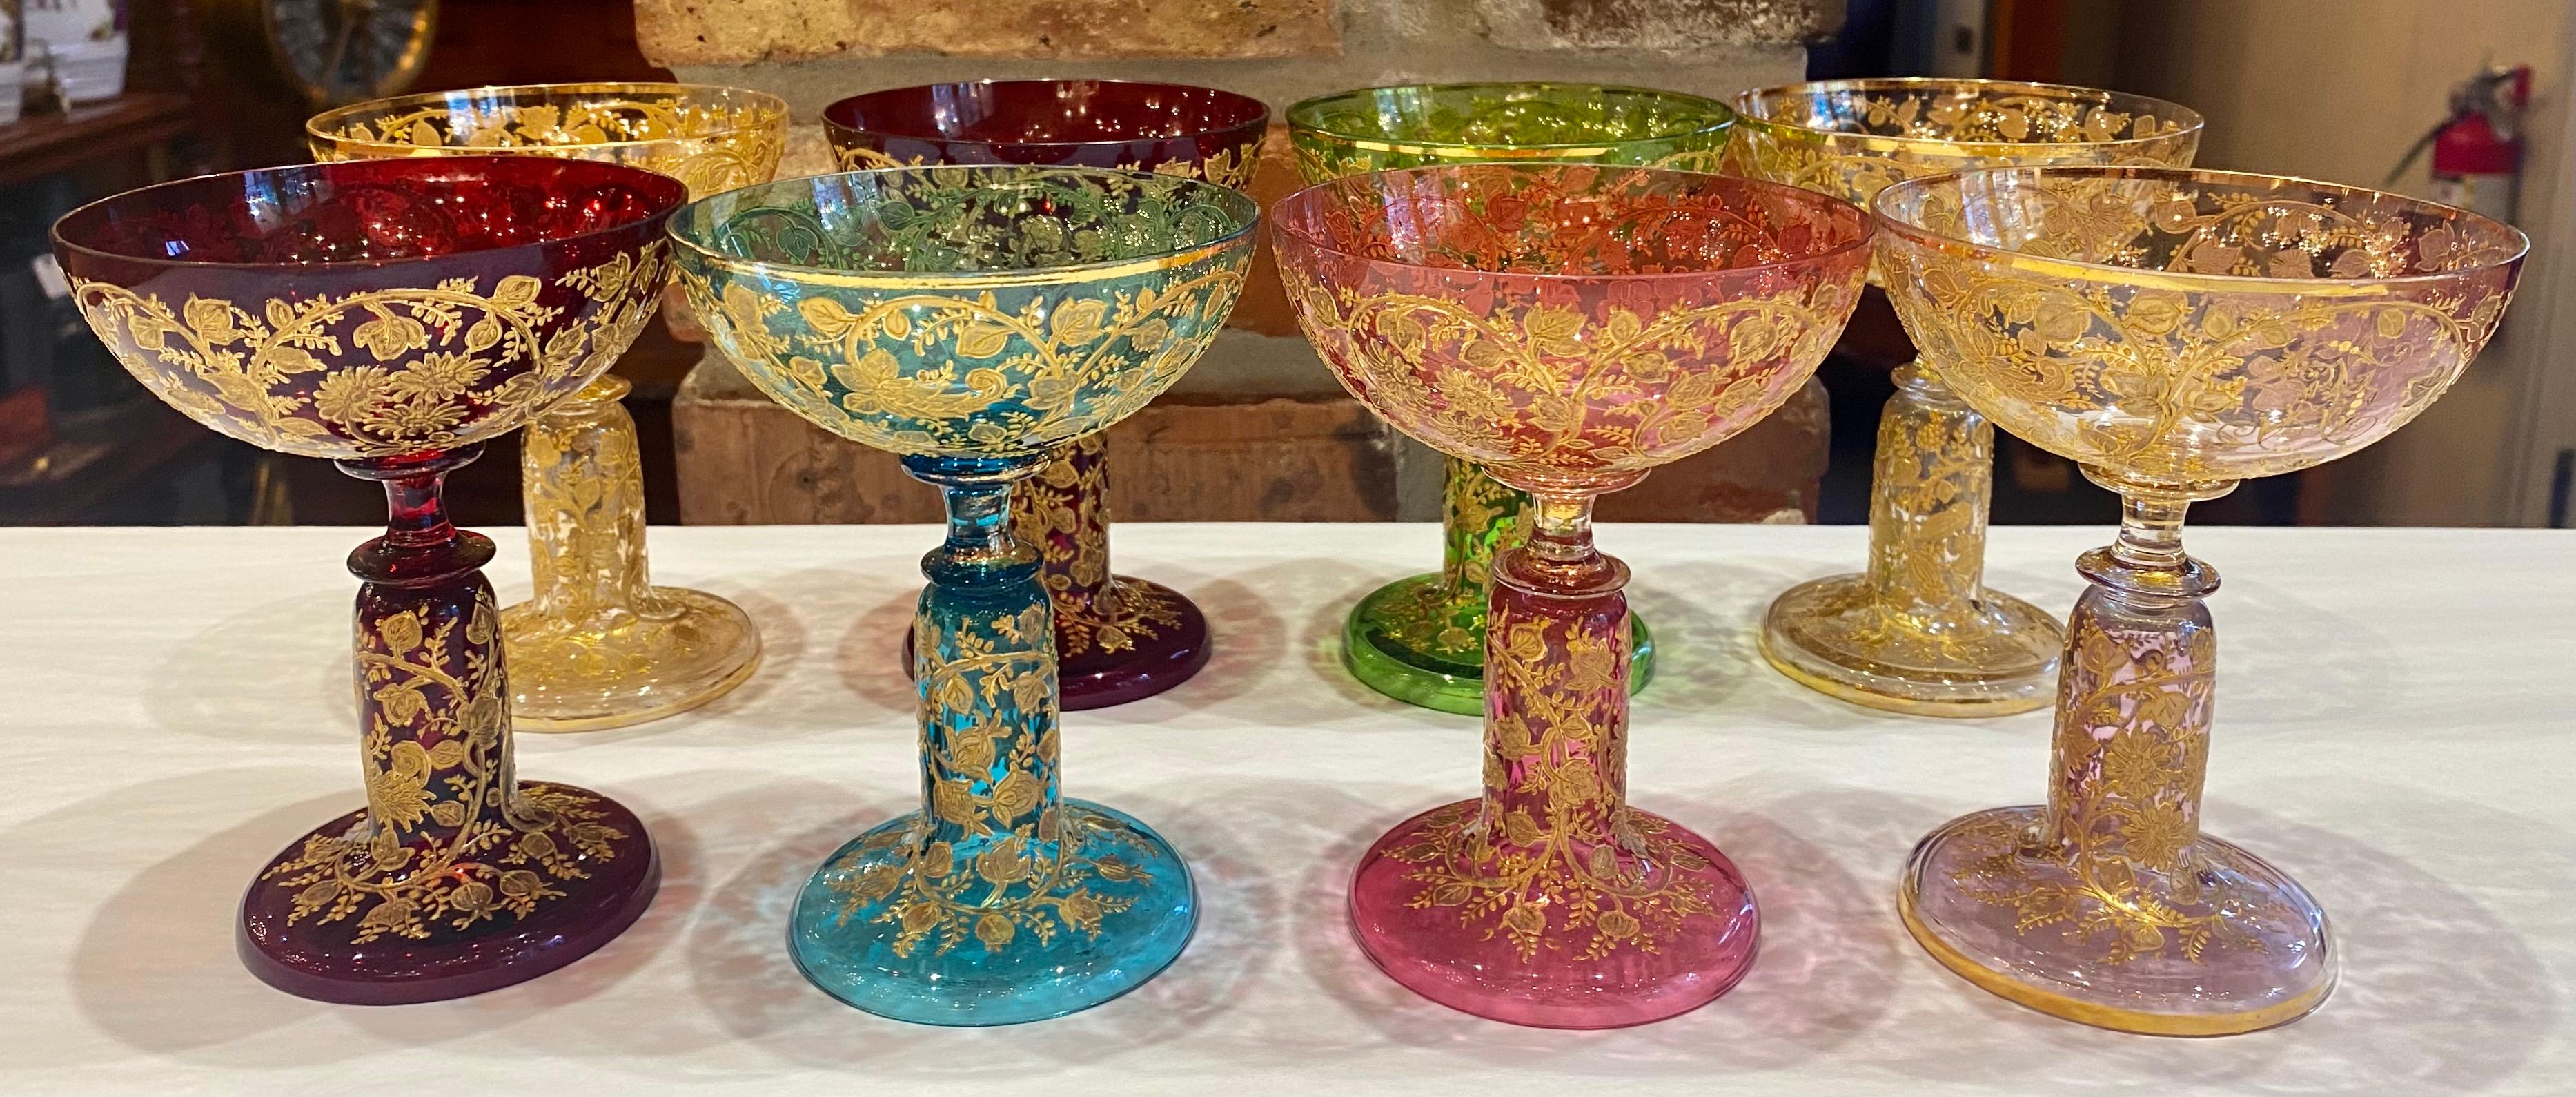 Set of 8 Antique Moser Glass Multi-Colored Champagne Coupes, Circa 1890.   